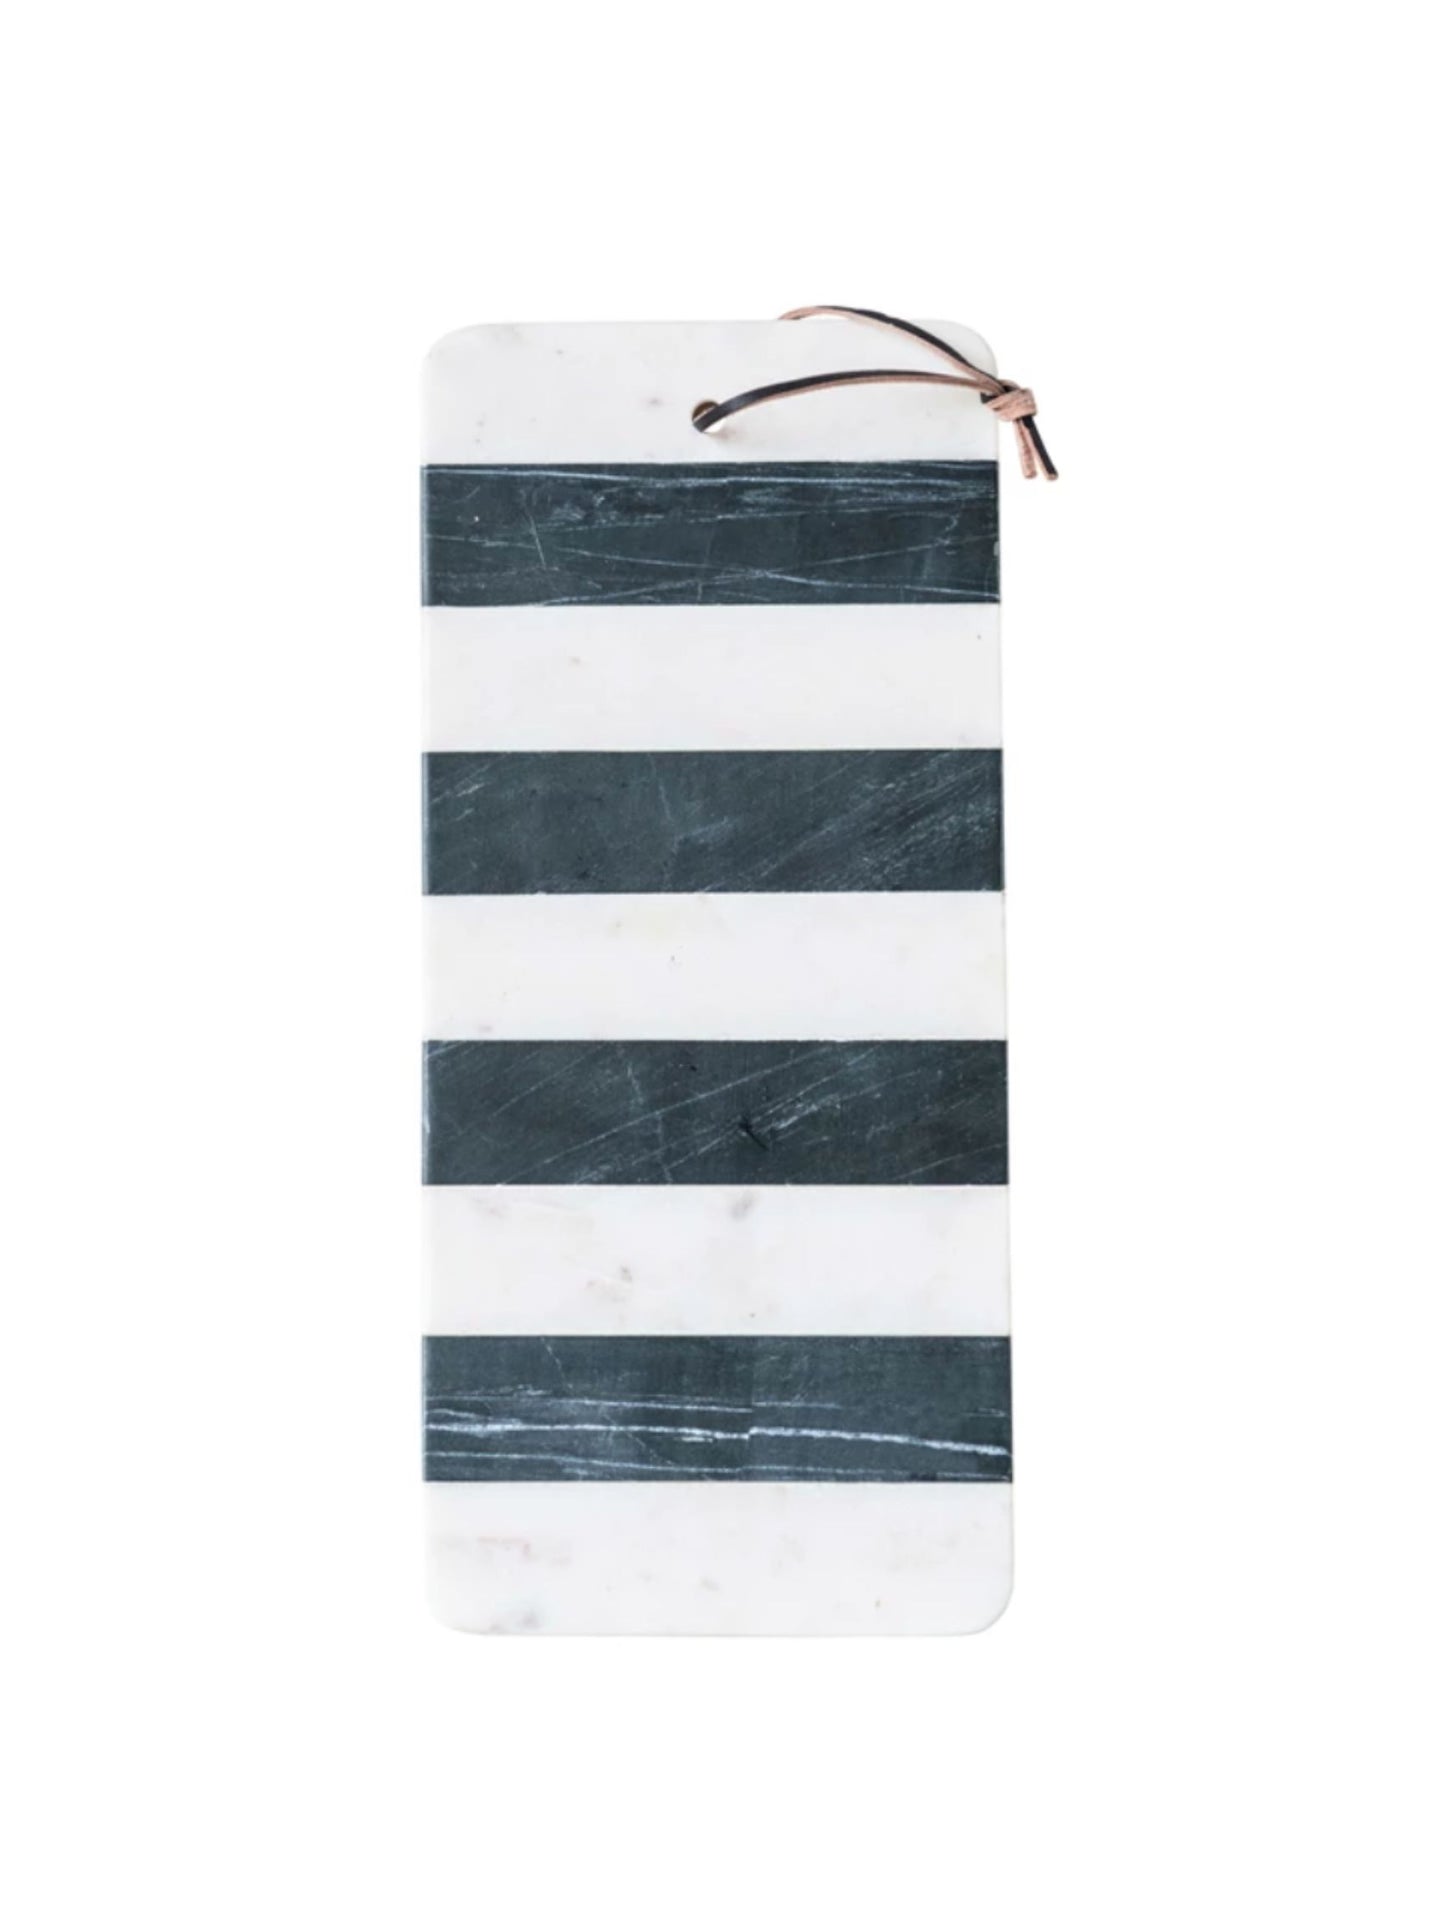 Black & White Marble Cheese/Cutting Board w/ Stripes & Leather Tie (PICK UP ONLY)